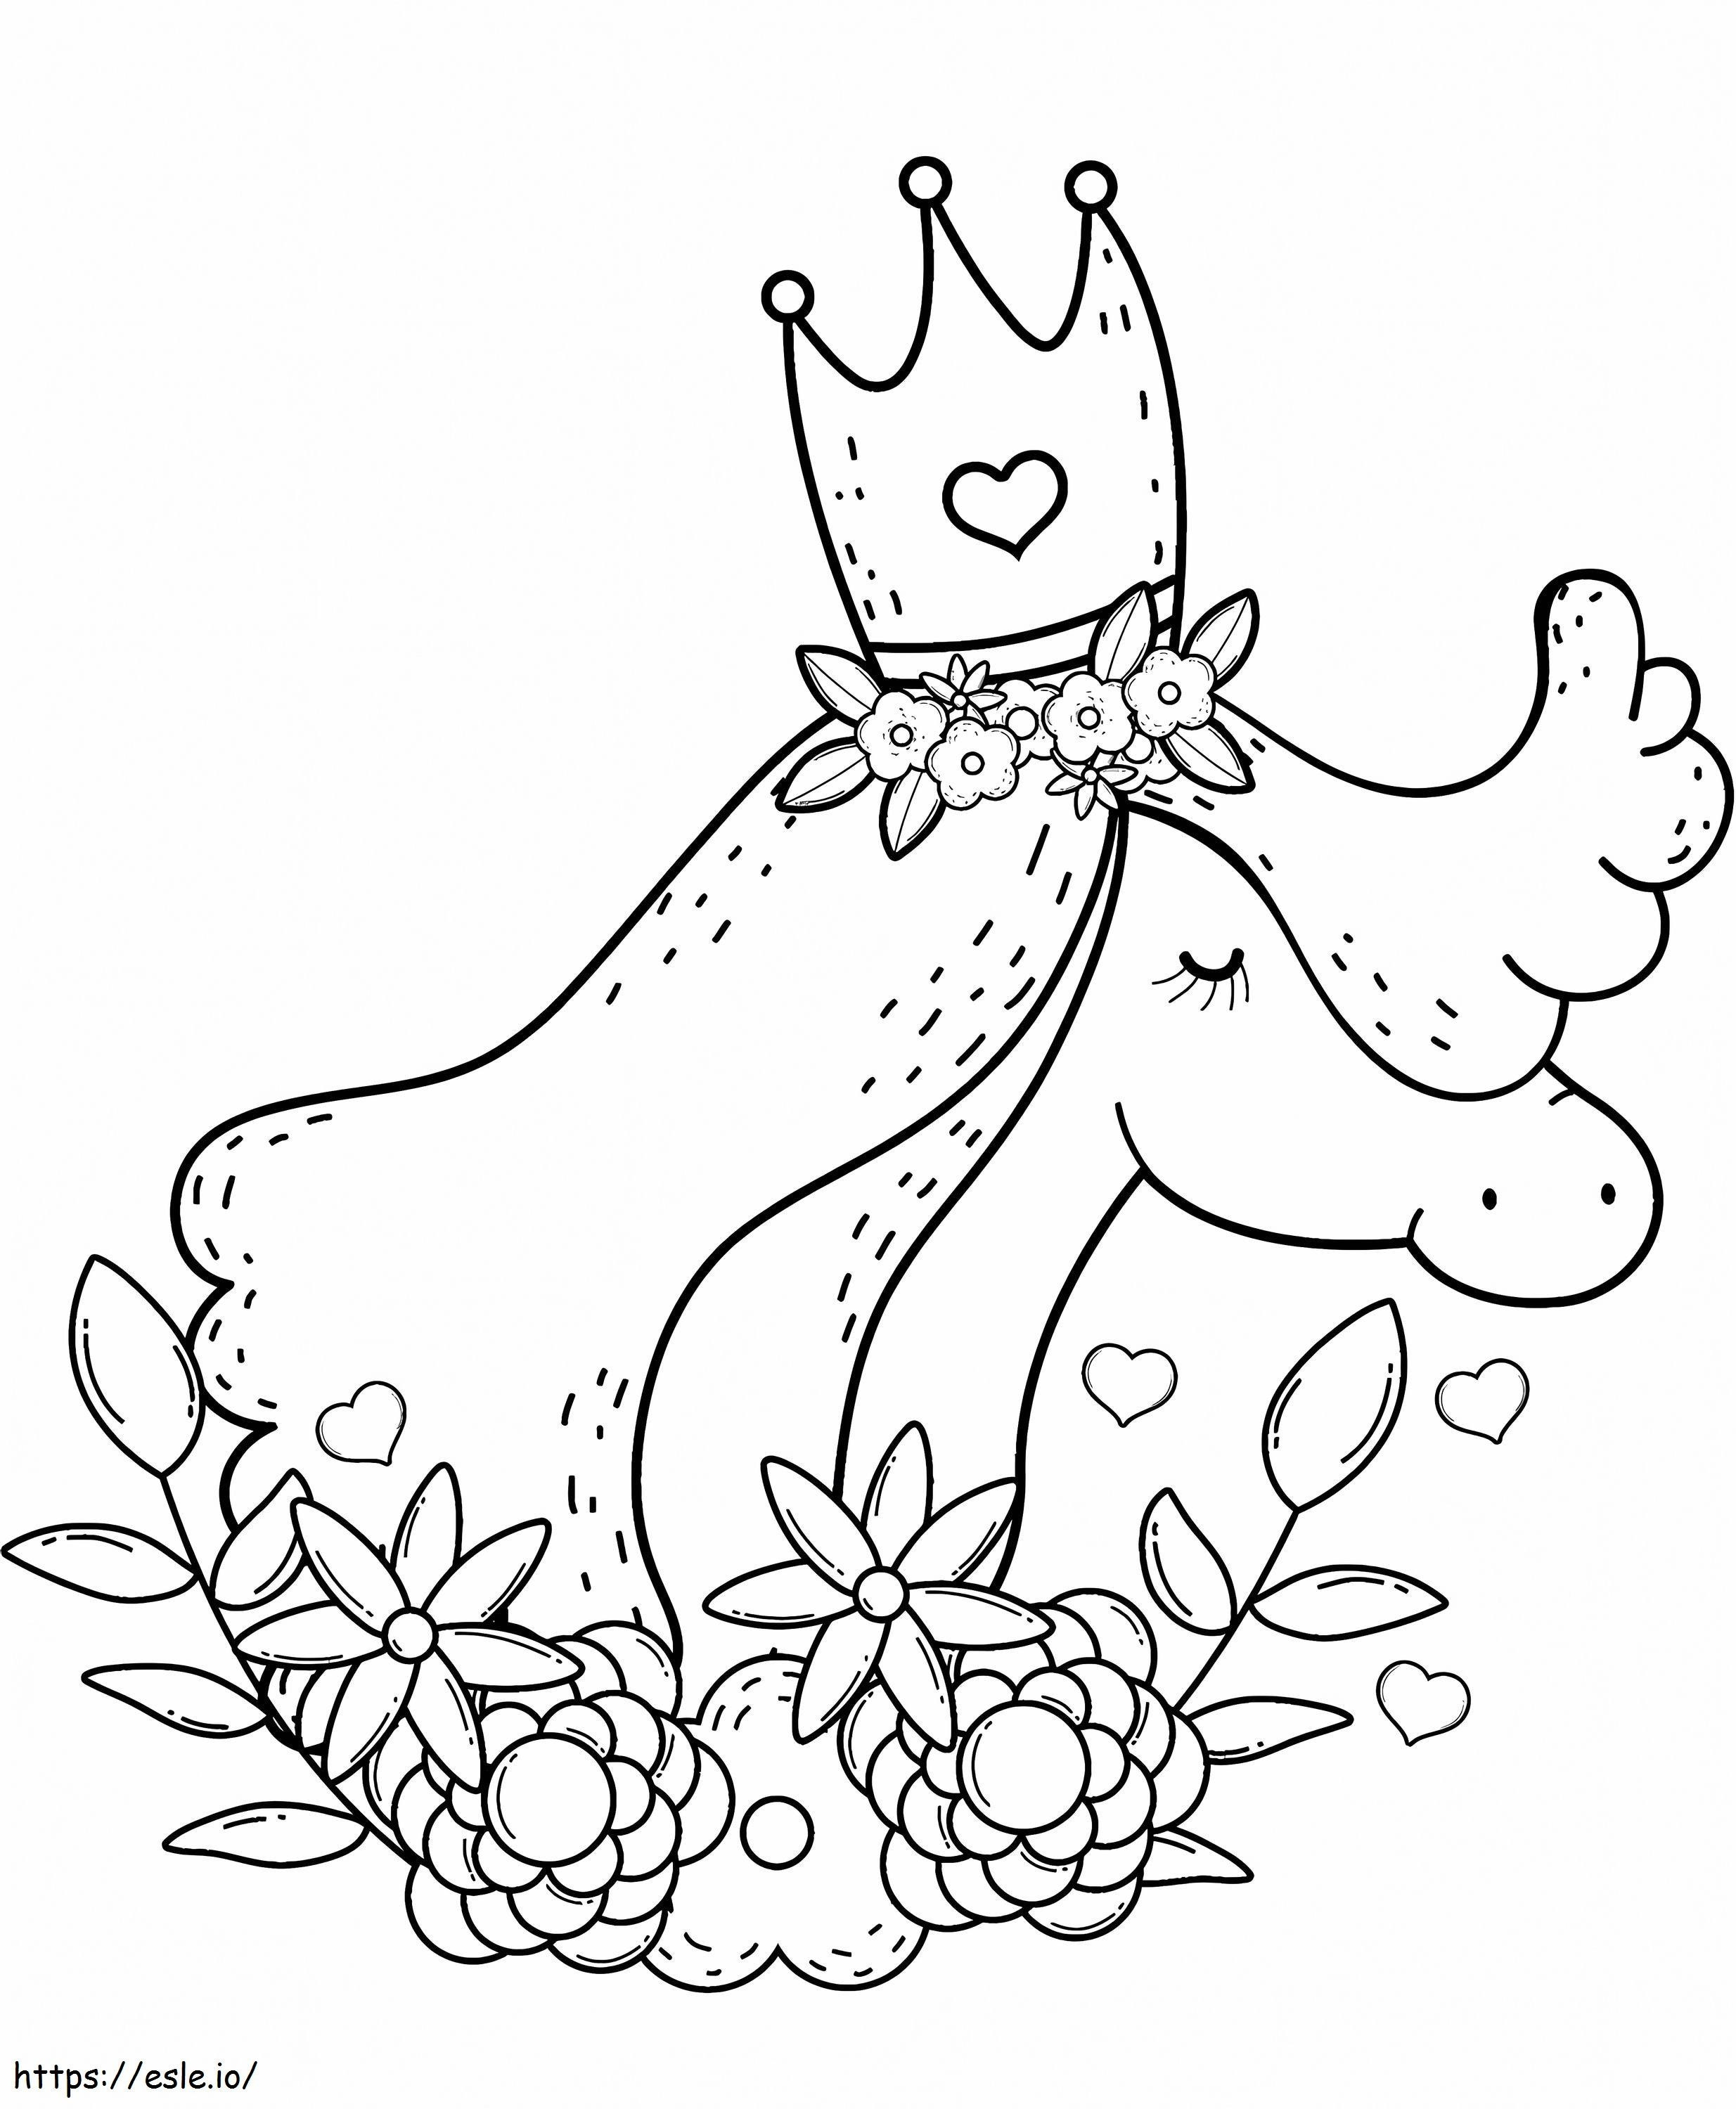 1564536219 Unicorn Wearing Crown A4 coloring page